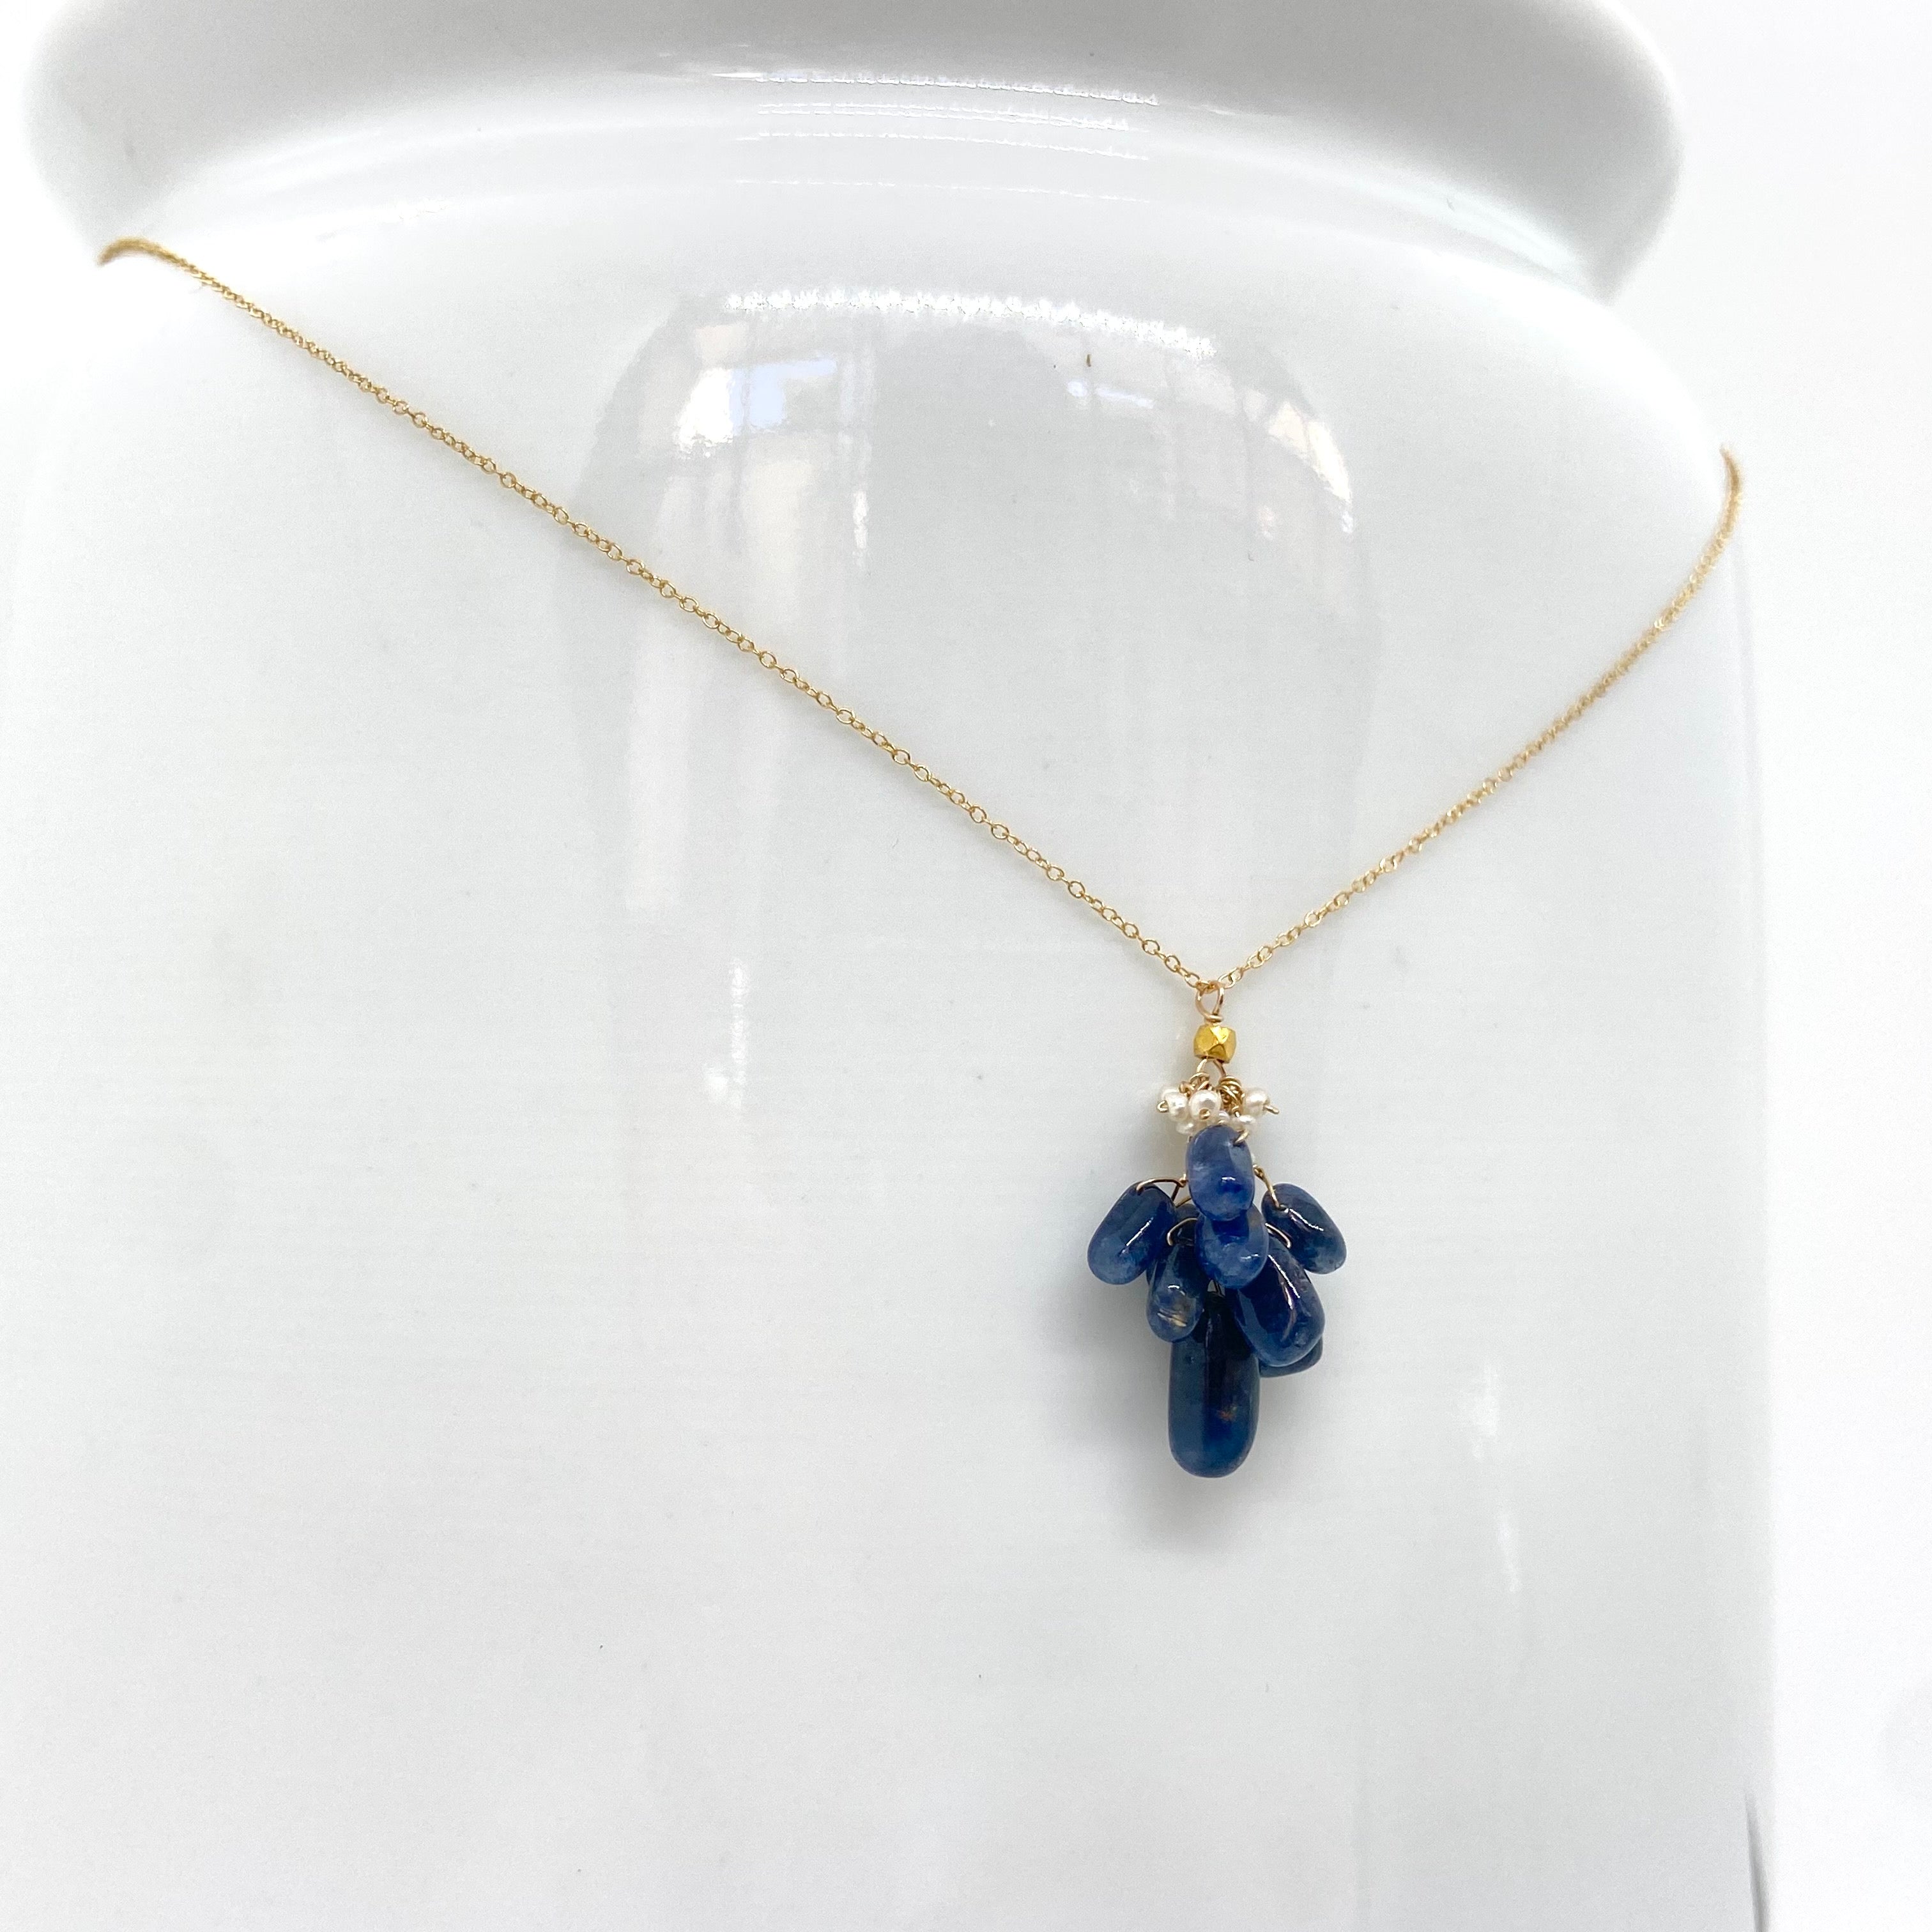 14k Gold Chain Necklace w/ Blue Sapphires, 18k Gold Nugget, Freshwater Pearls & Antique Italian Beads